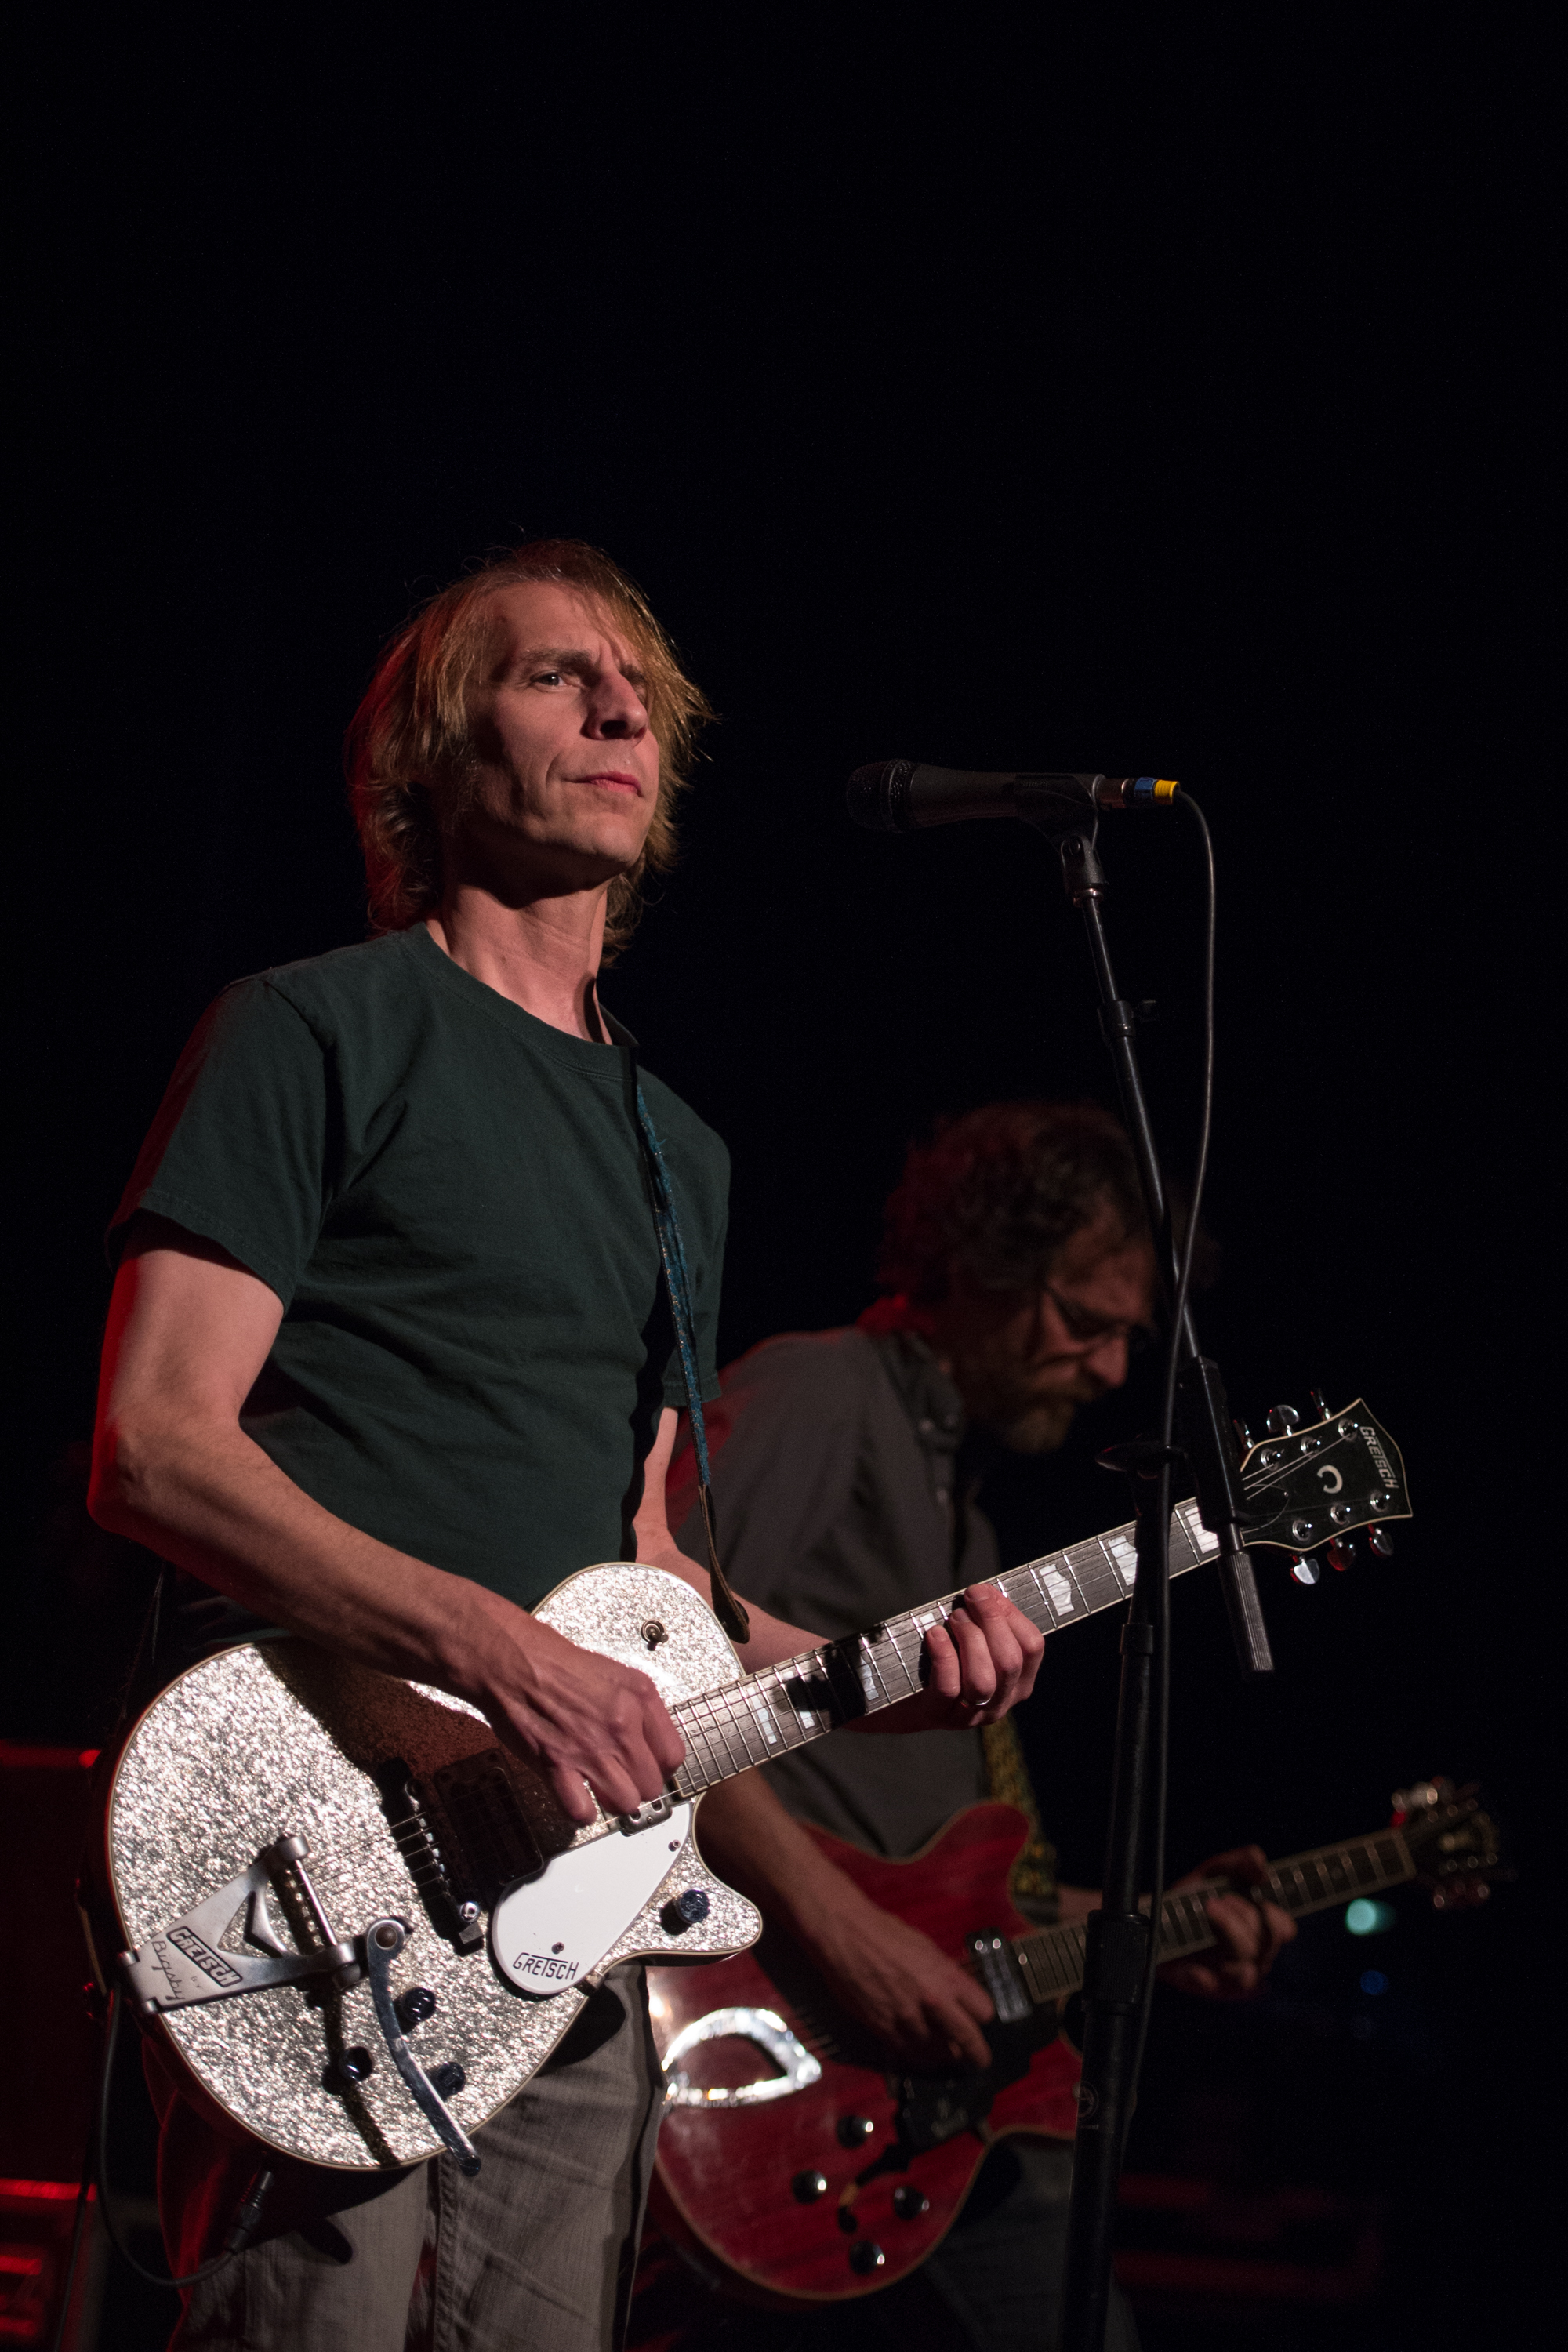 Mudhoney perform at the Moore Theatre.